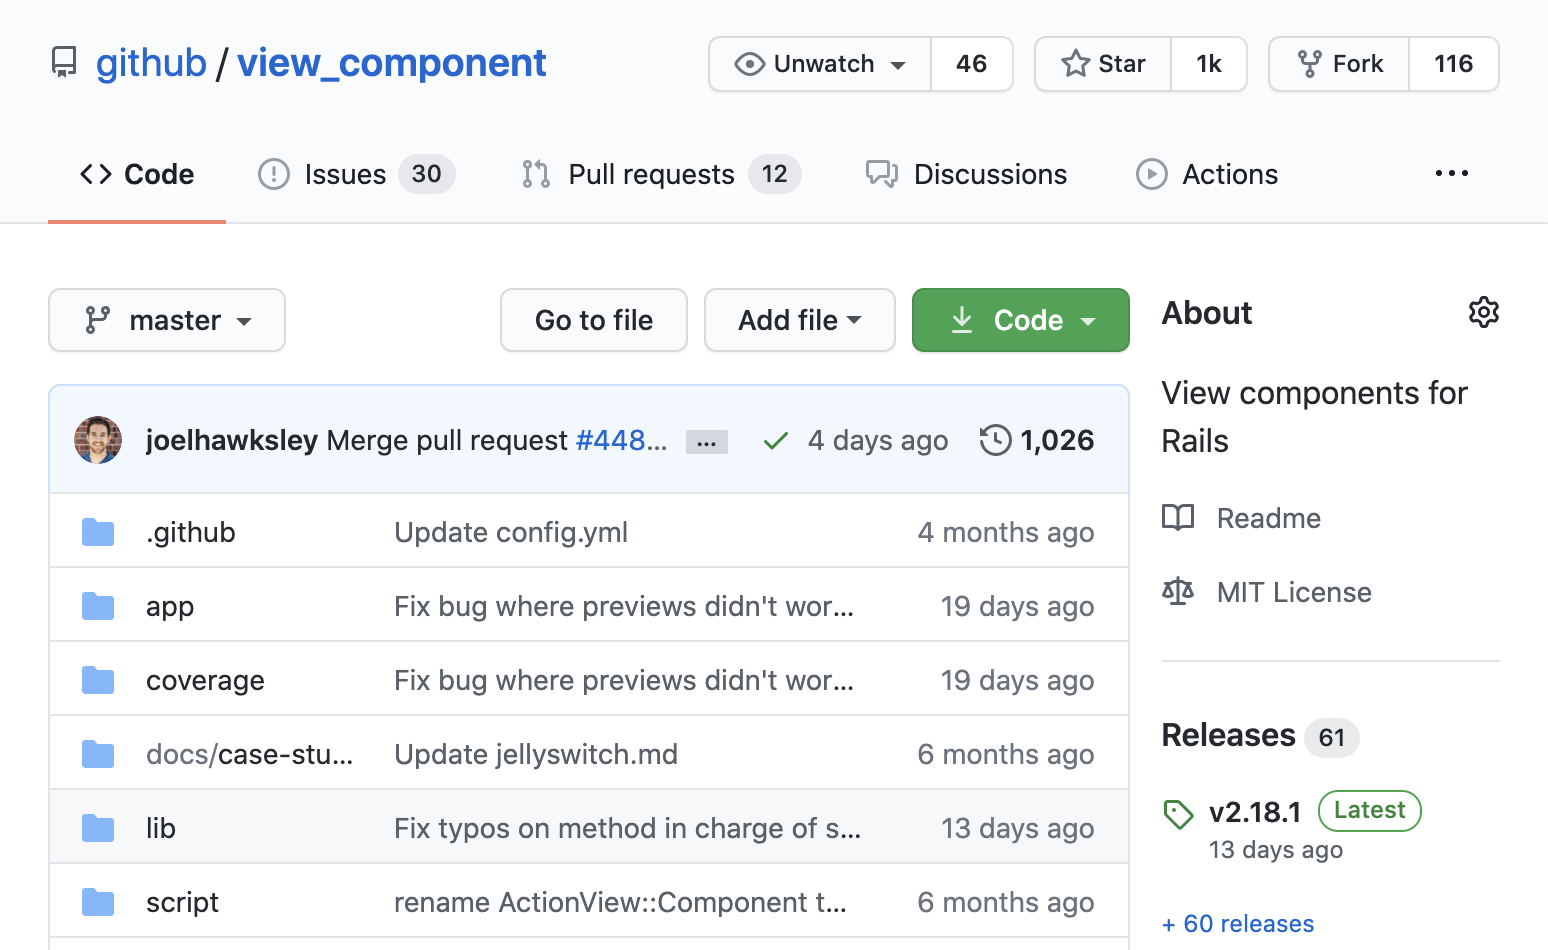 A screenshot of the GitHub.com repository page for the ViewComponent project